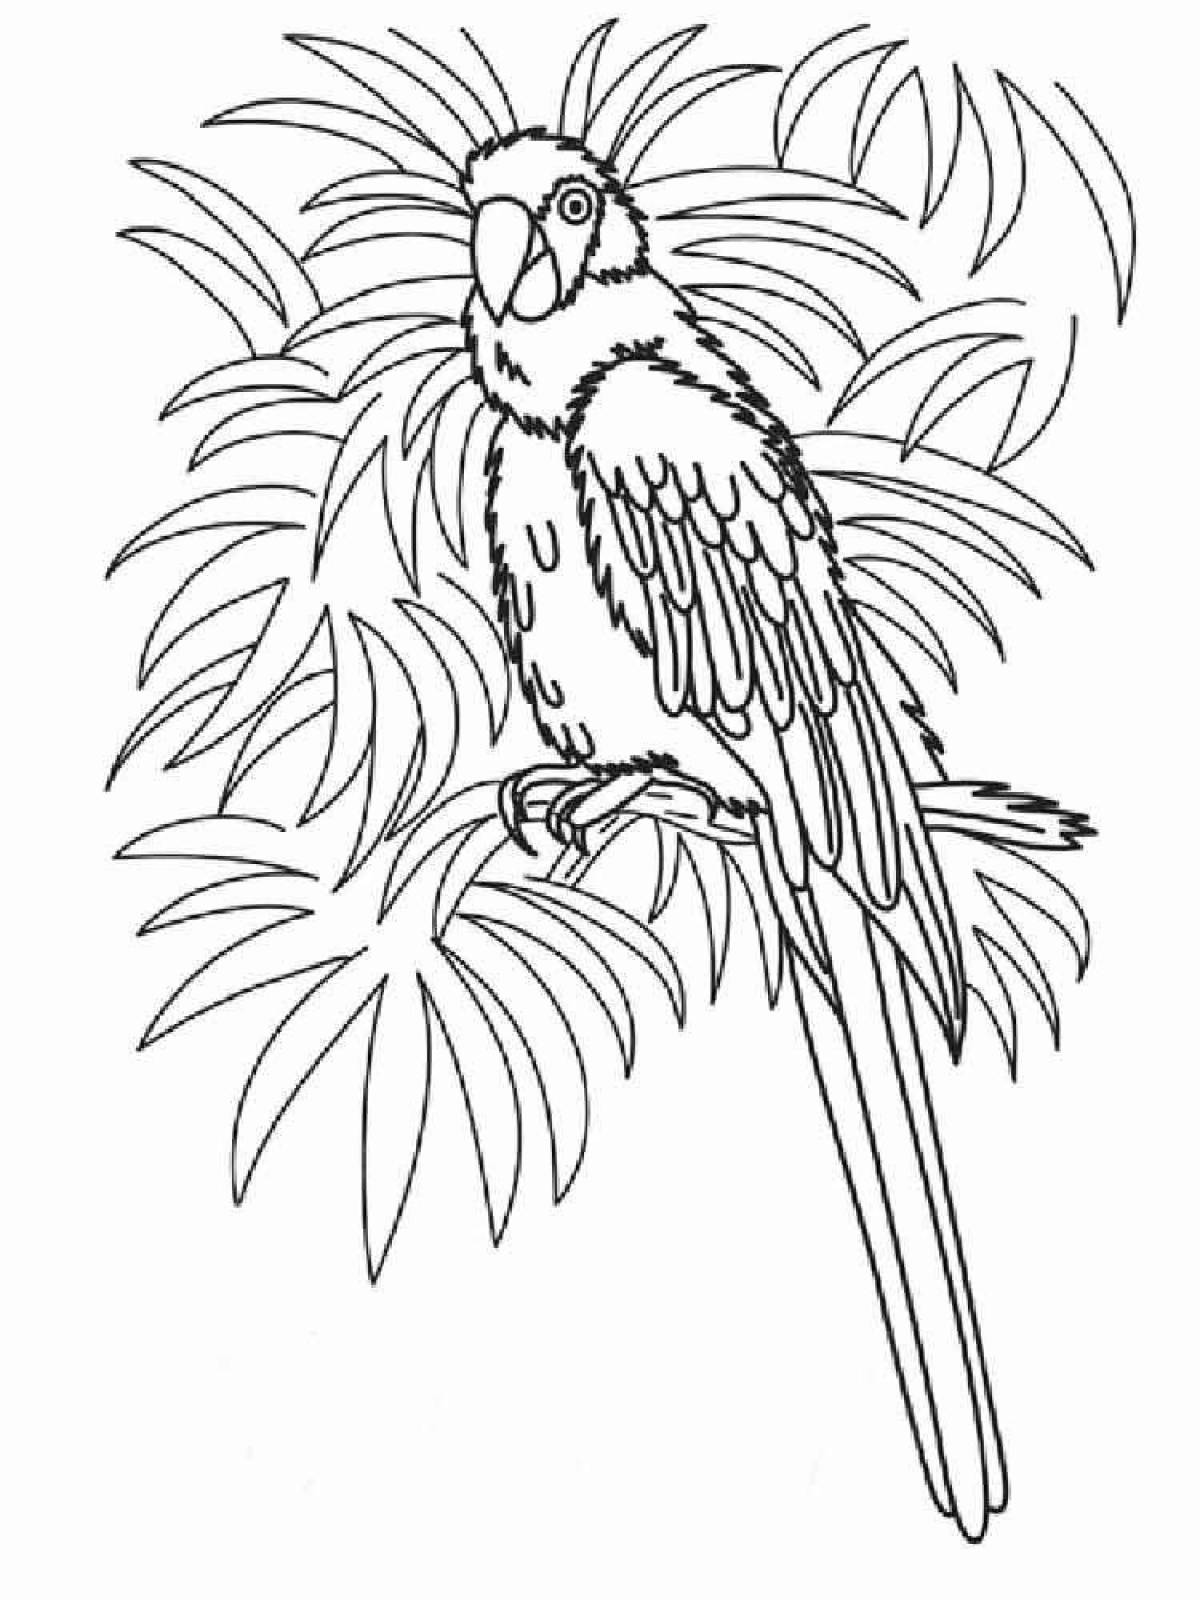 Exquisite parrot coloring book for kids